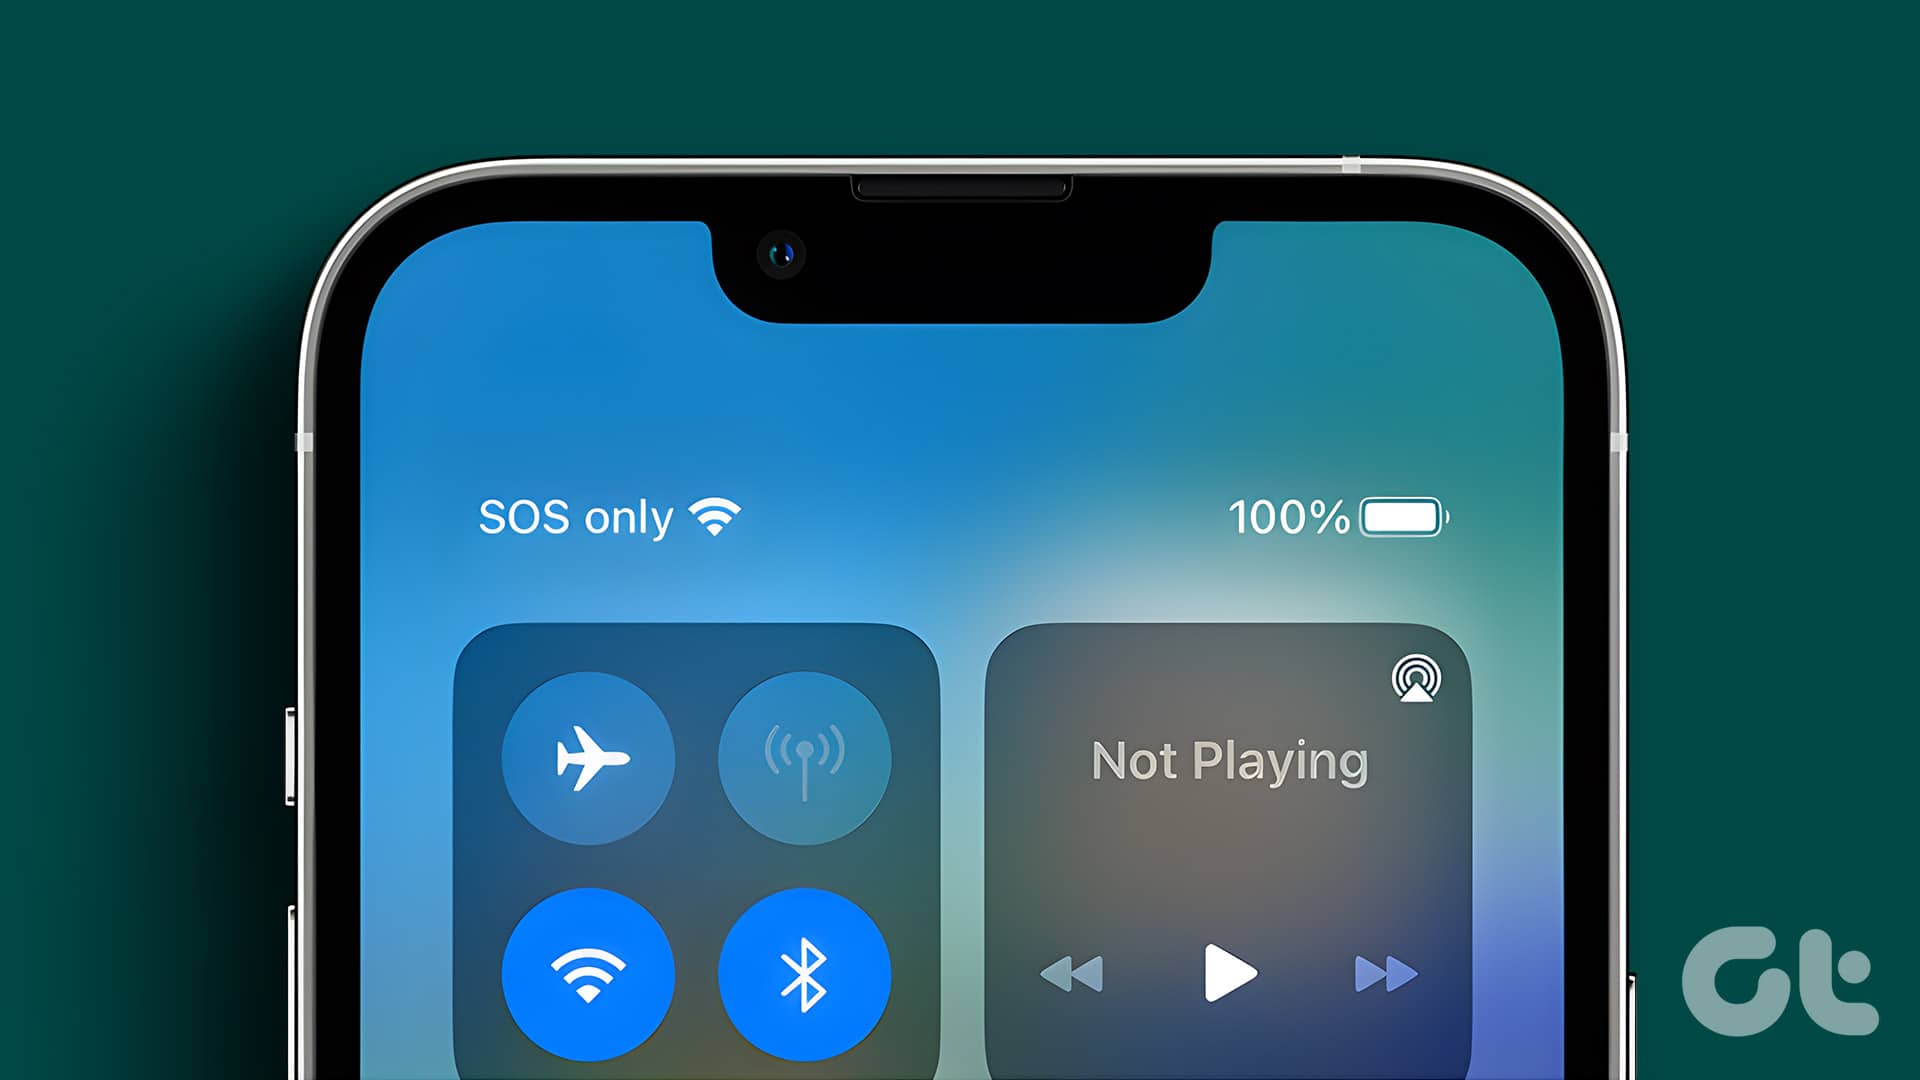 iPhone screen showing SOS only